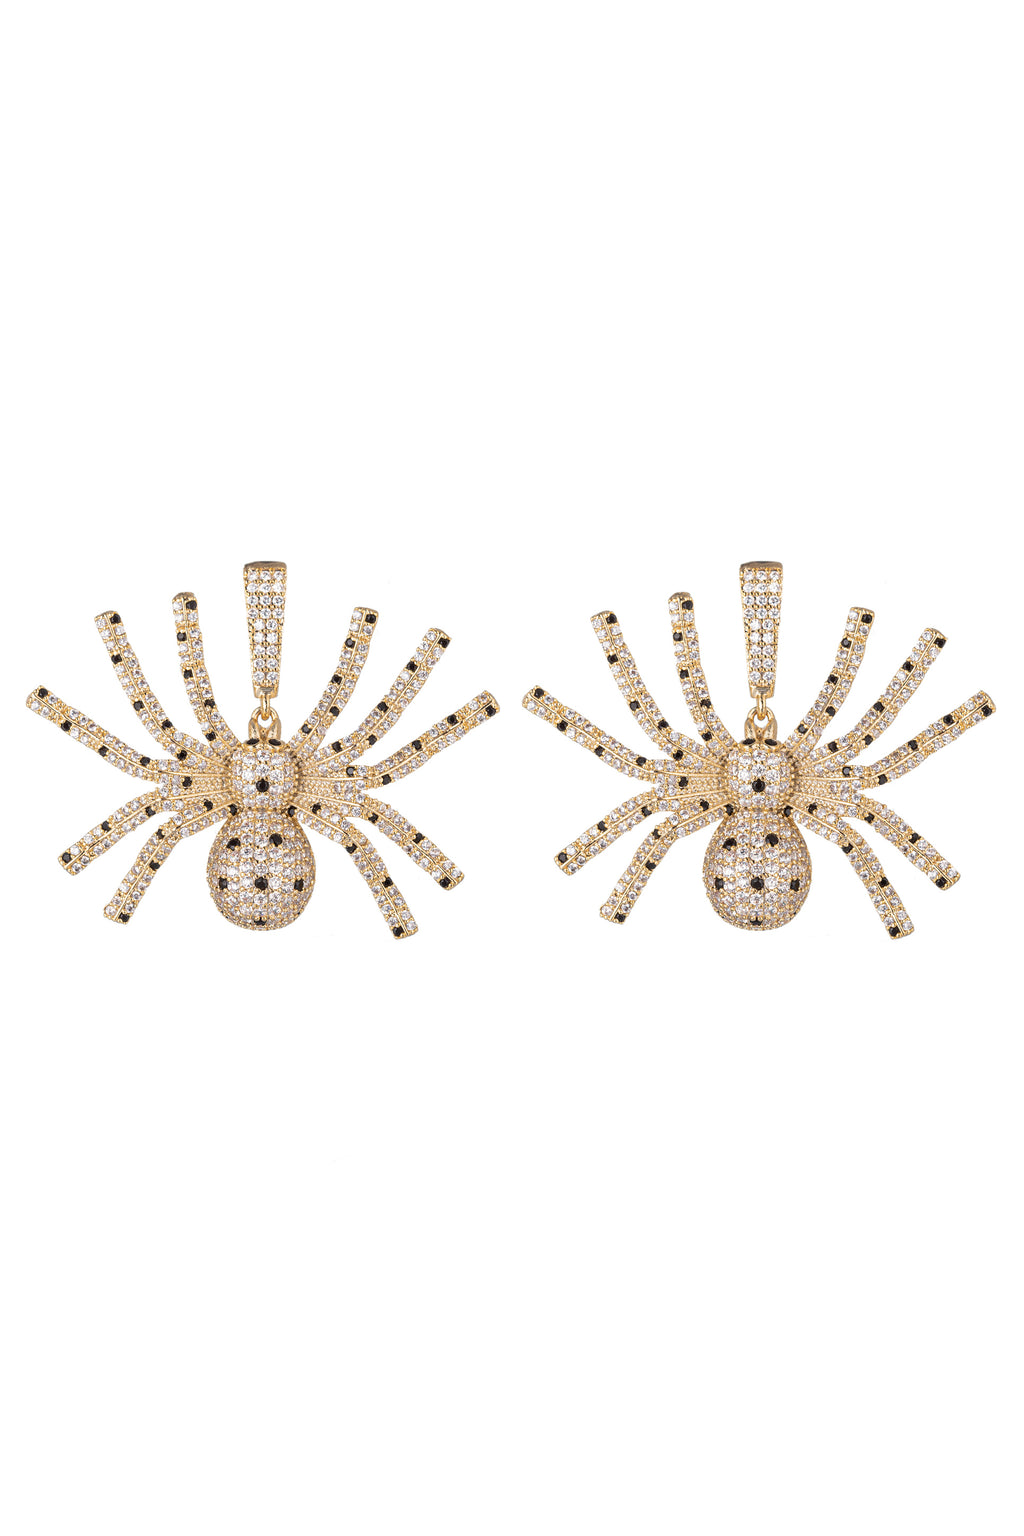 Gold tone brass spider pendant earrings studded with CZ crystals.